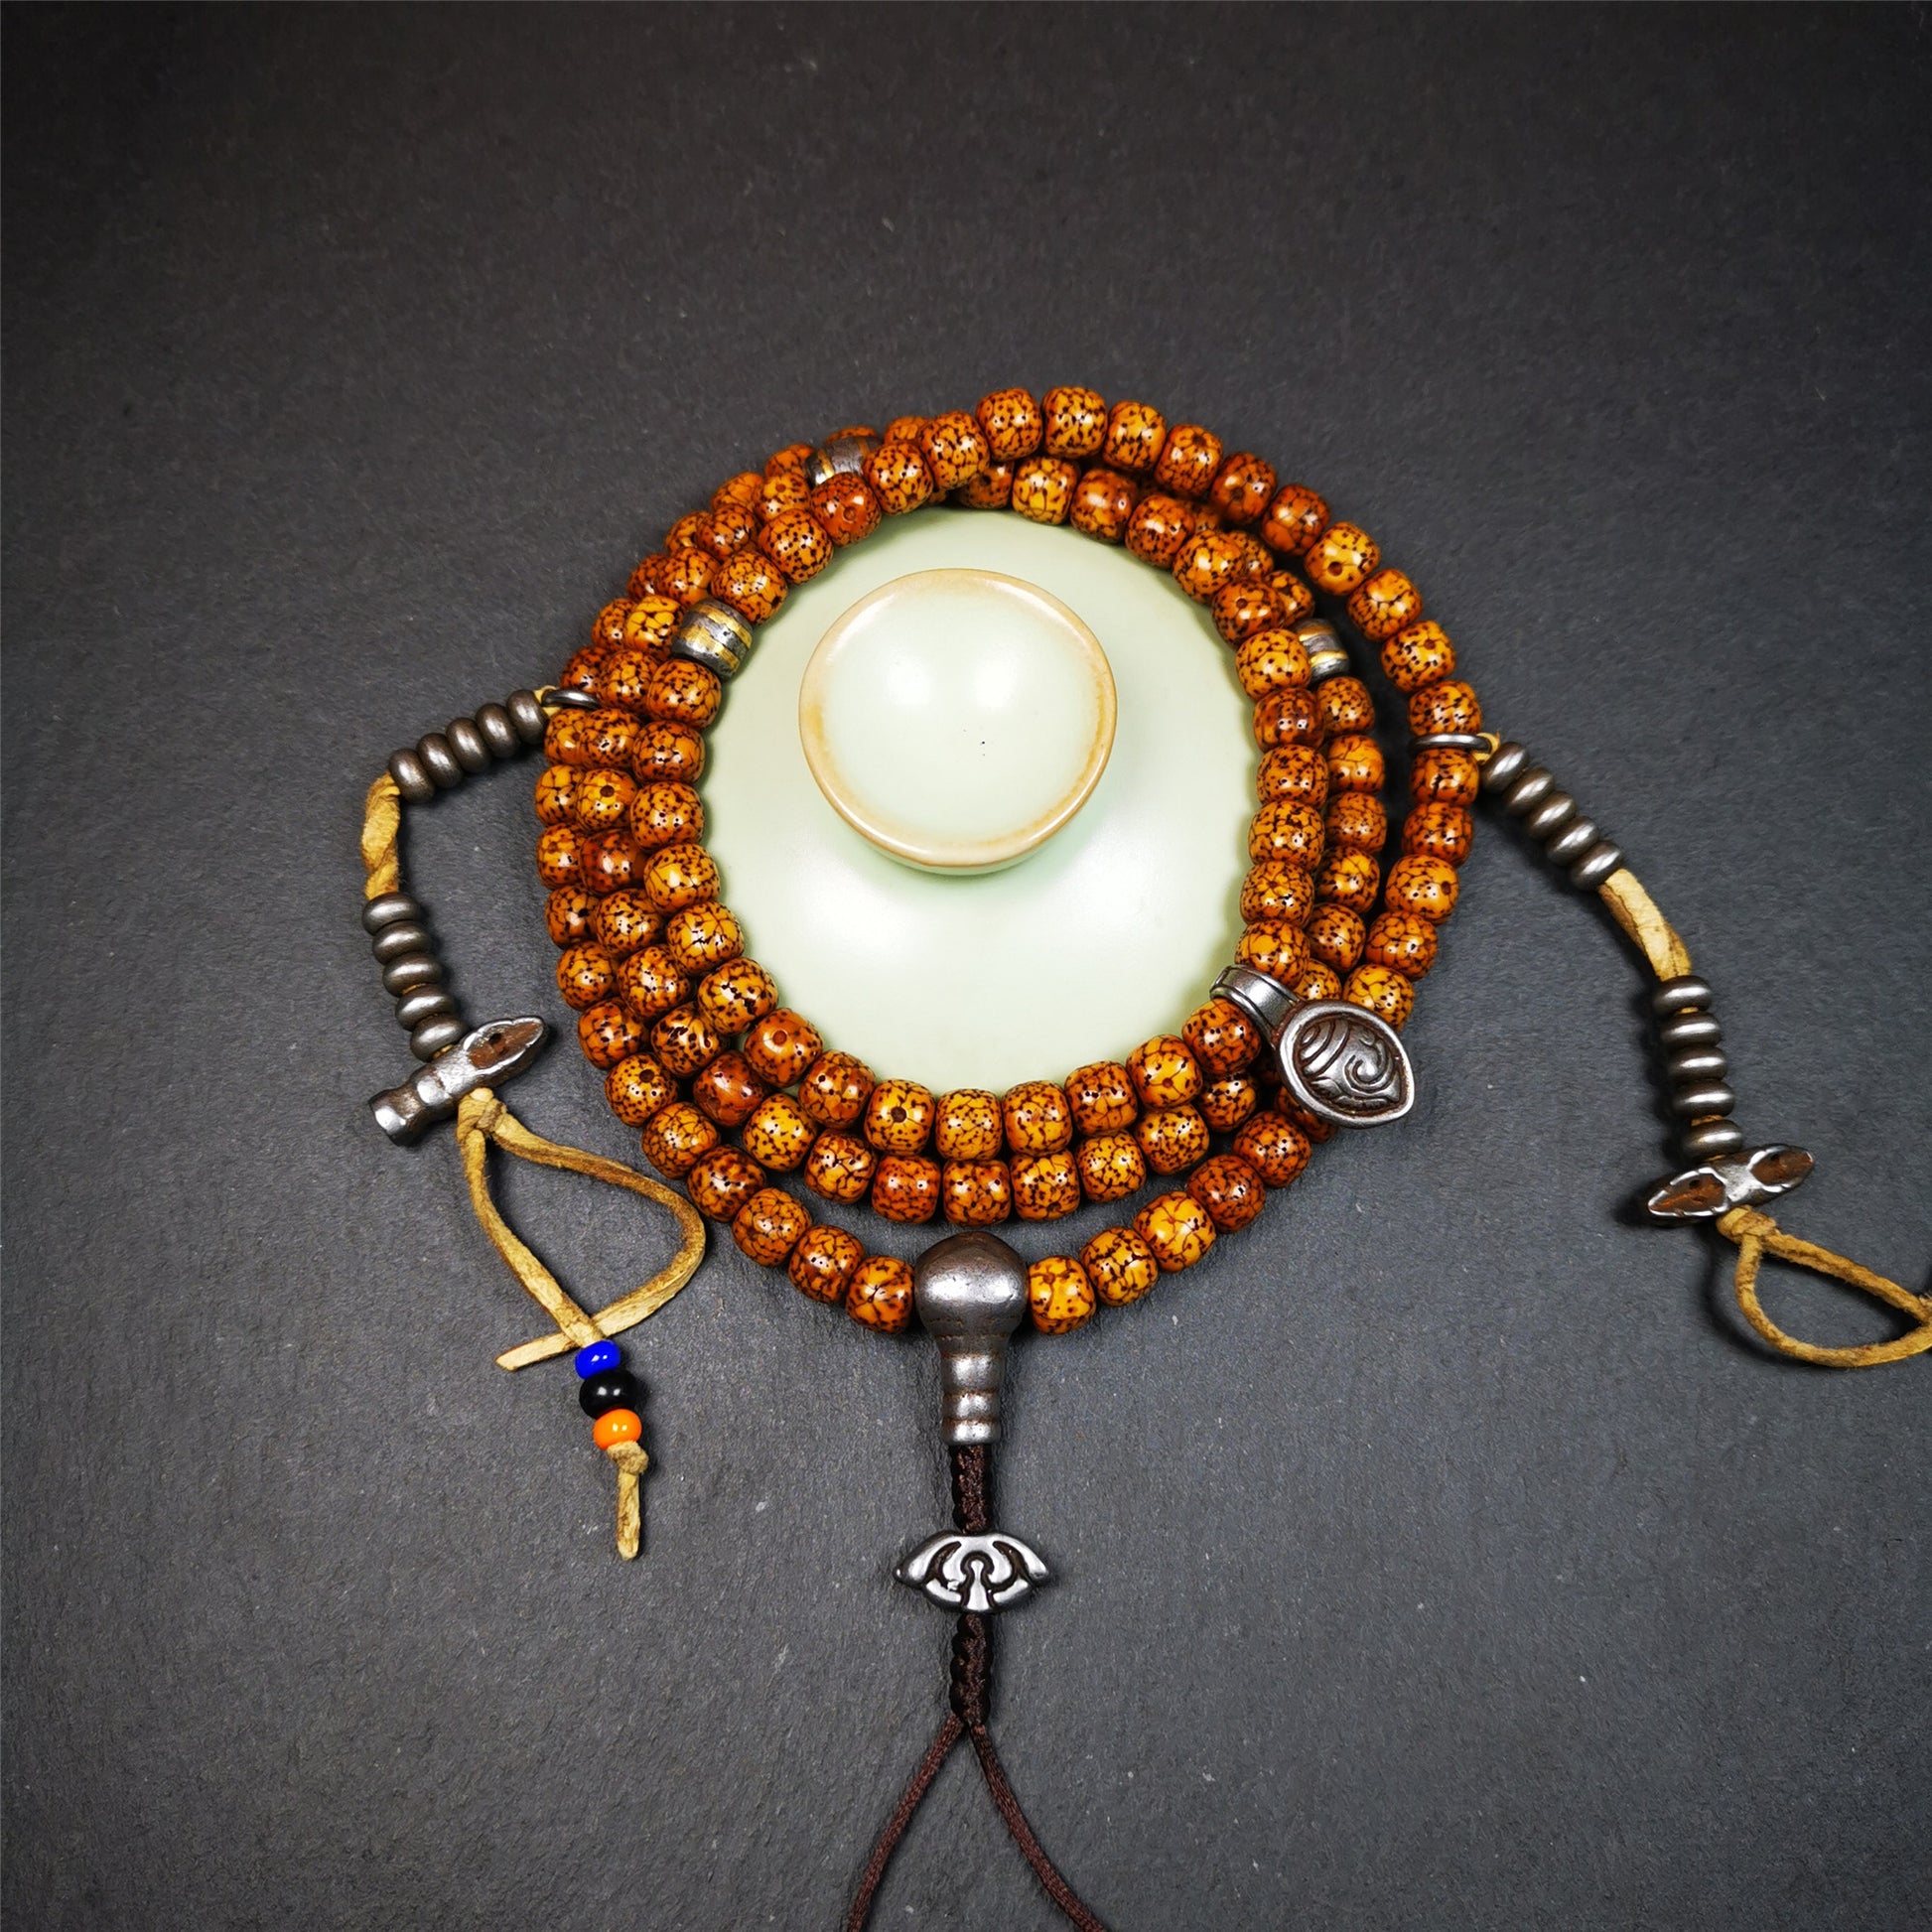 This old lotus seed mala was handmade from tibetan crafts man in Baiyu County. It's composed of 108 pcs 8mm lotus seed beads,with cold iron beads,1 pair of bead counters,guru bead,and vajra pendant.